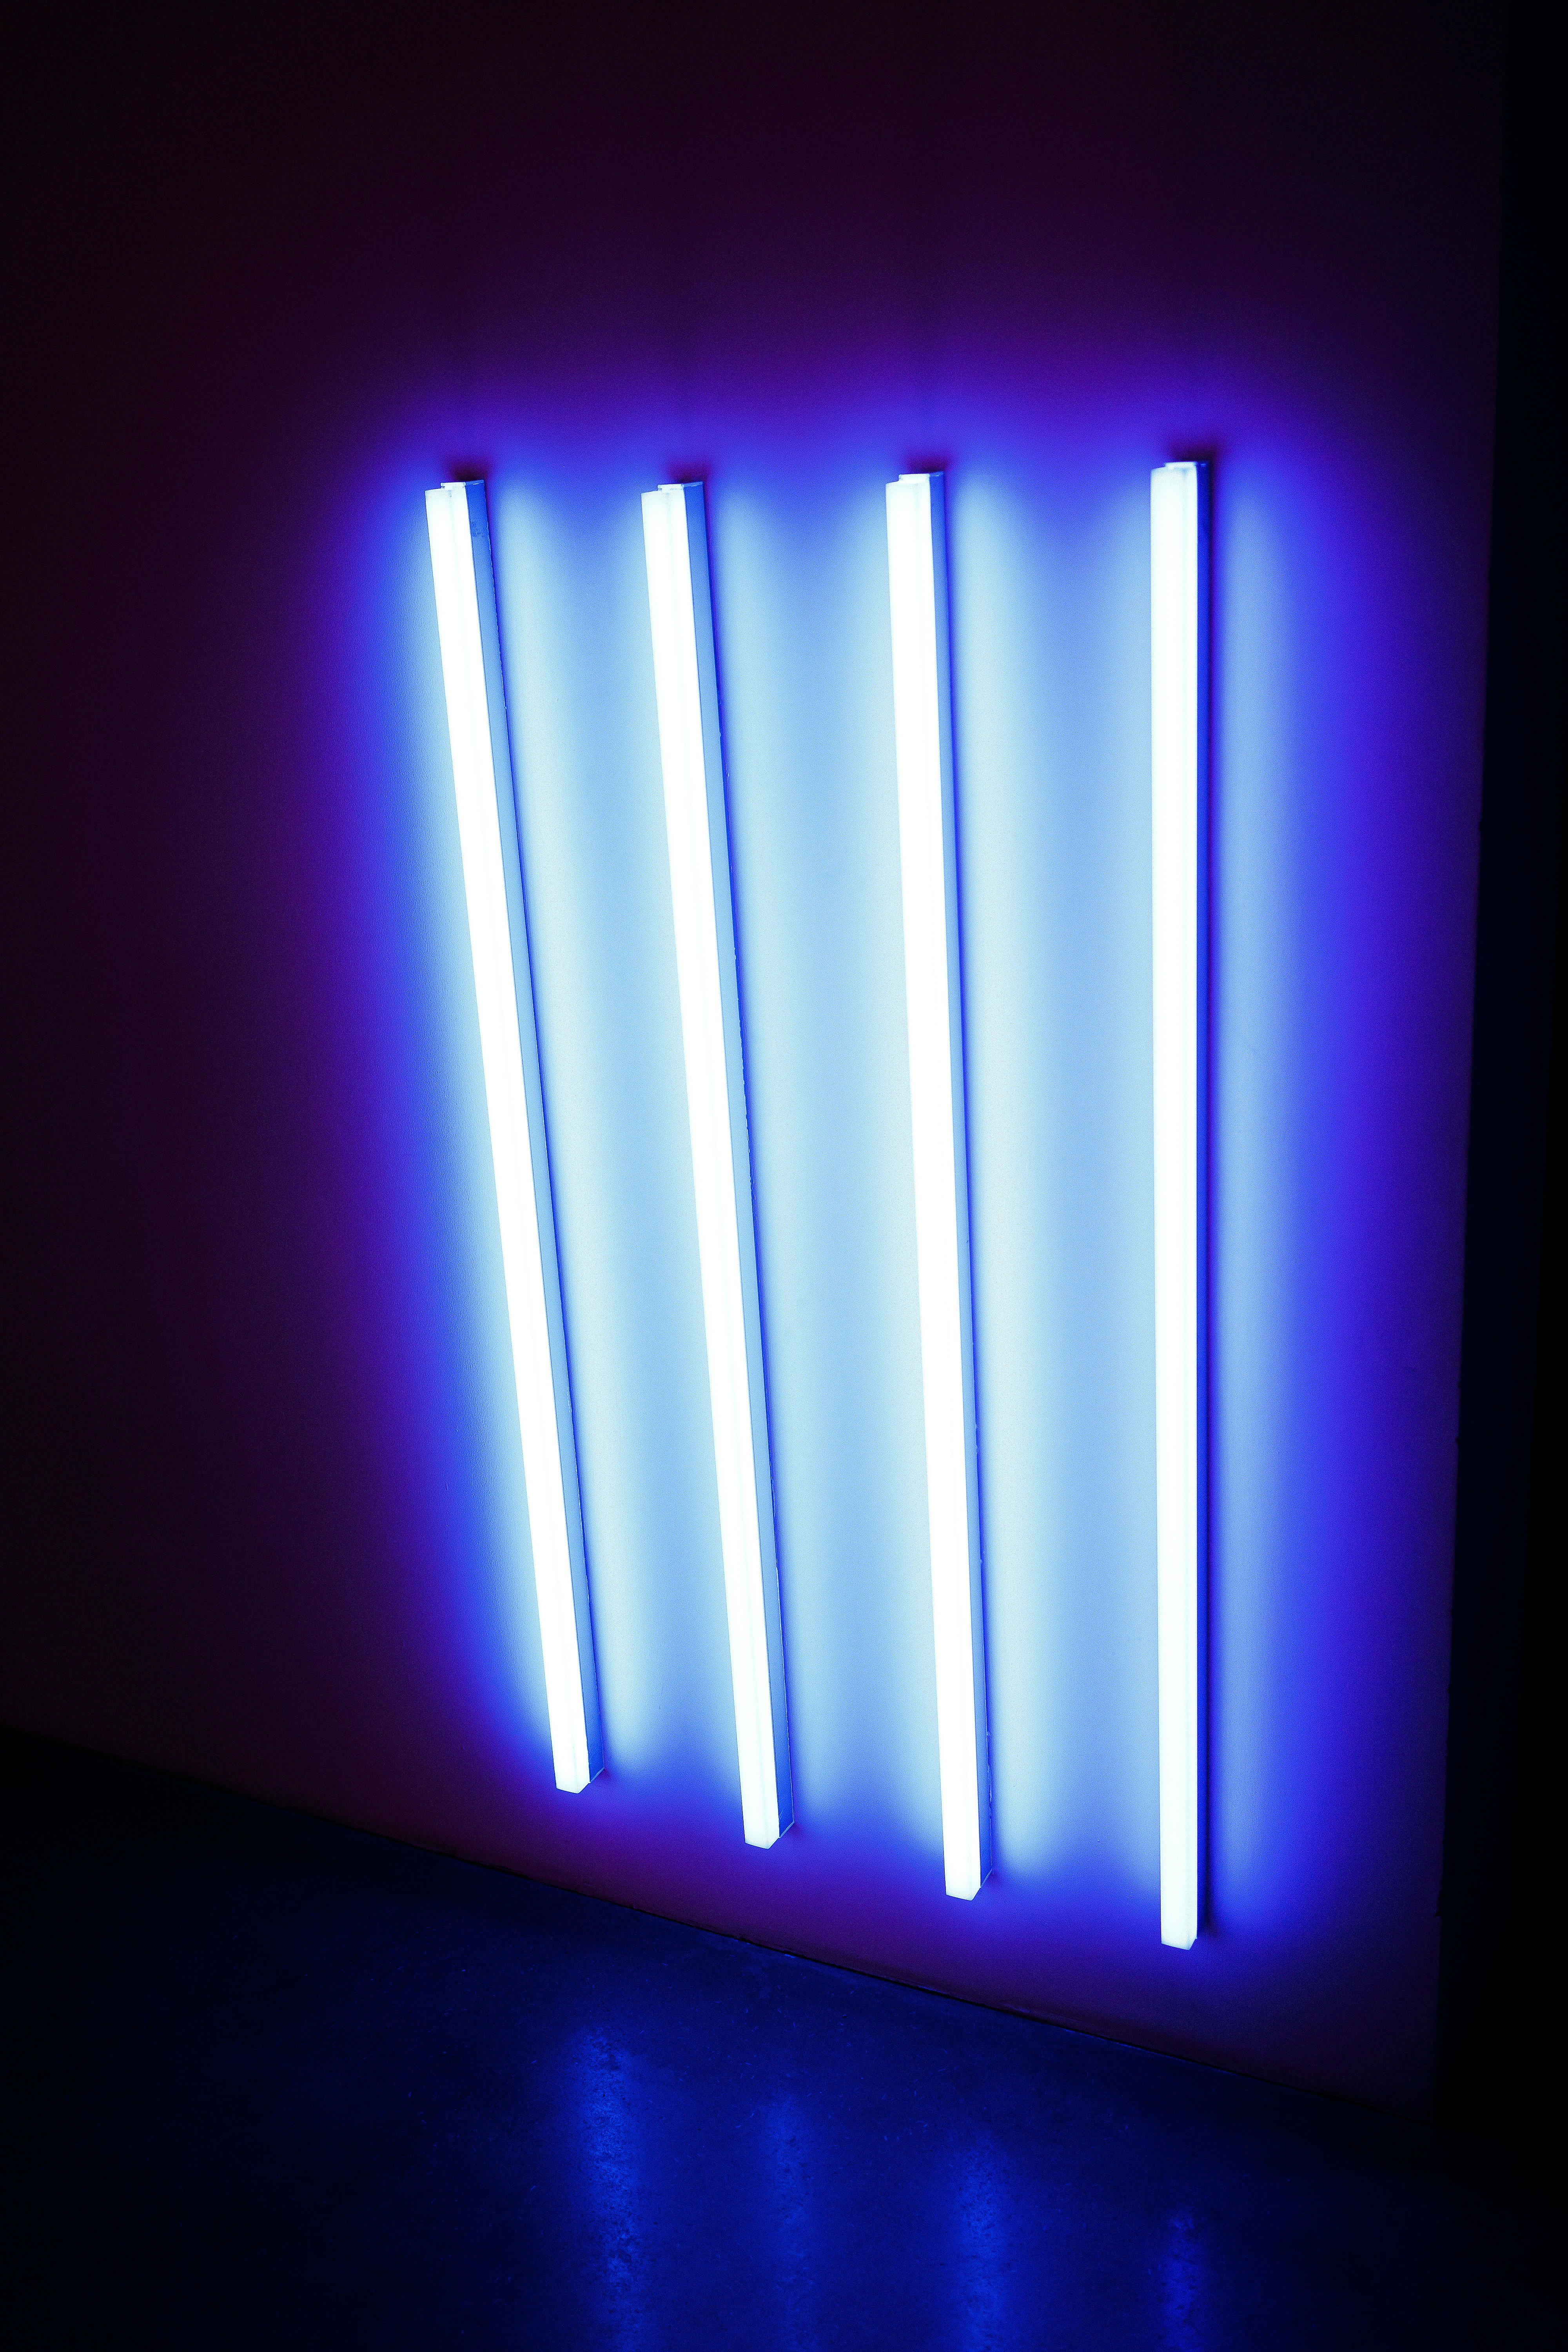 four UV fluorescent lamps turned on